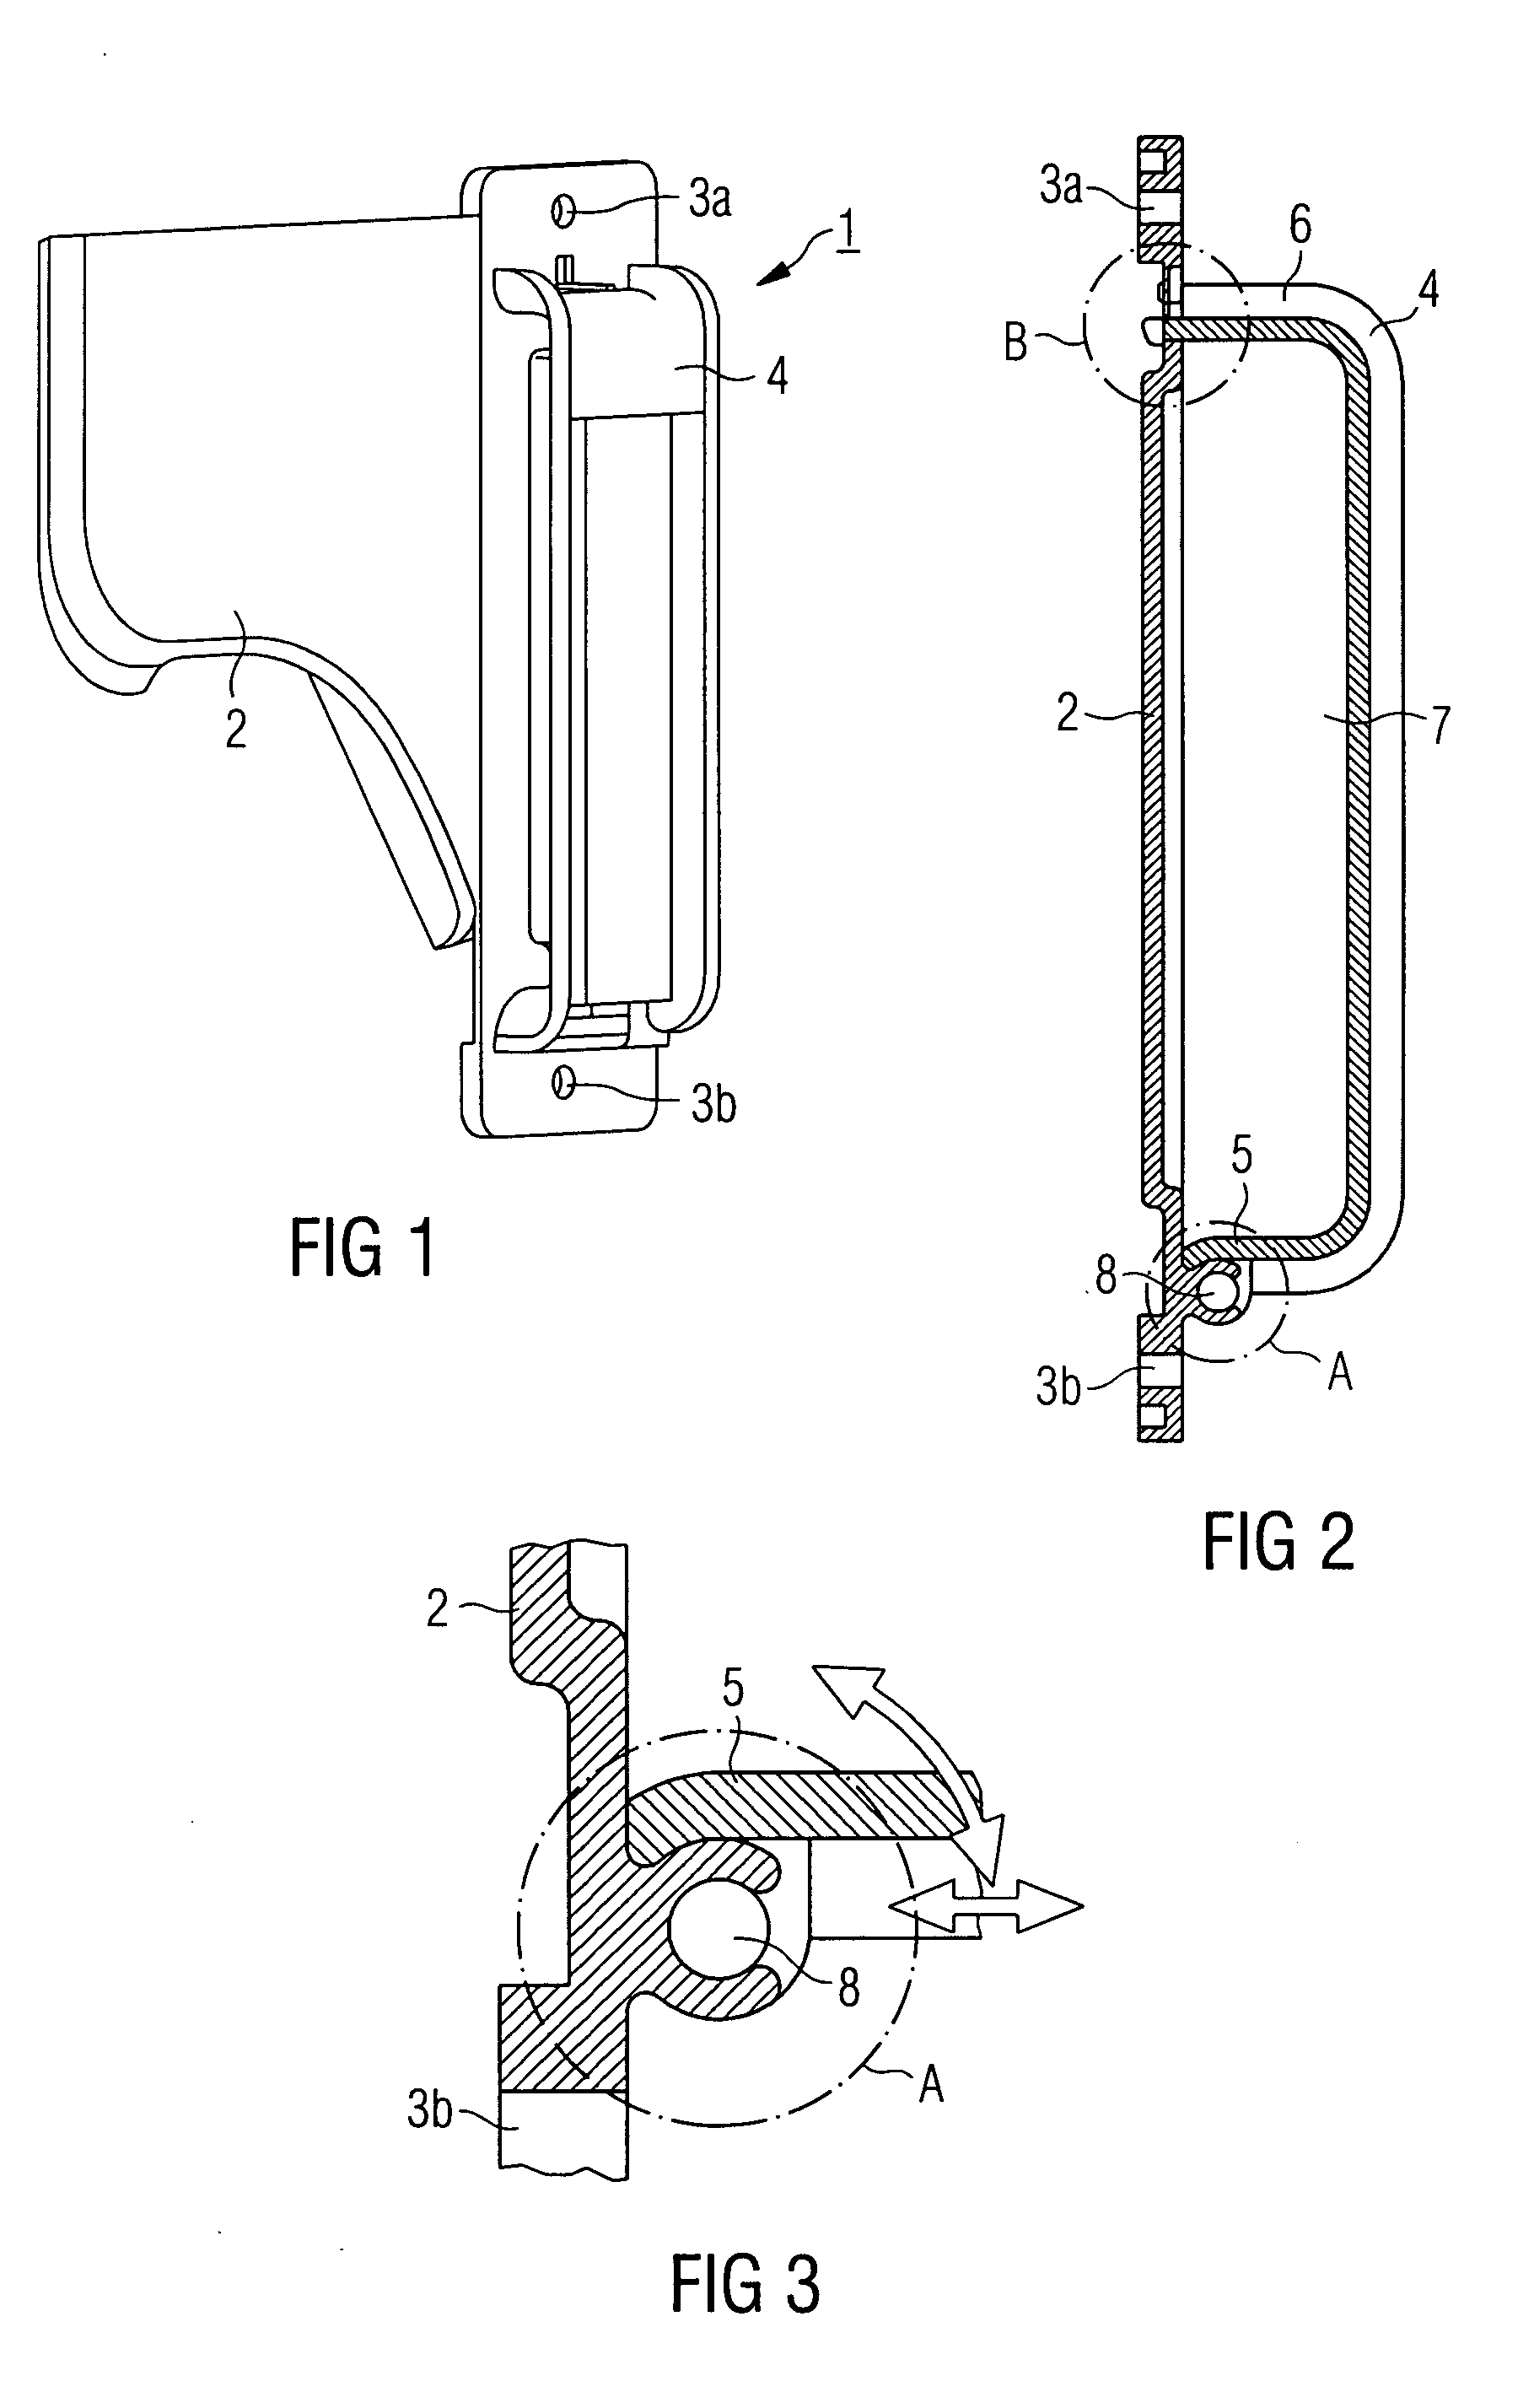 Holder for holding and guiding bundles of cables in aircraft